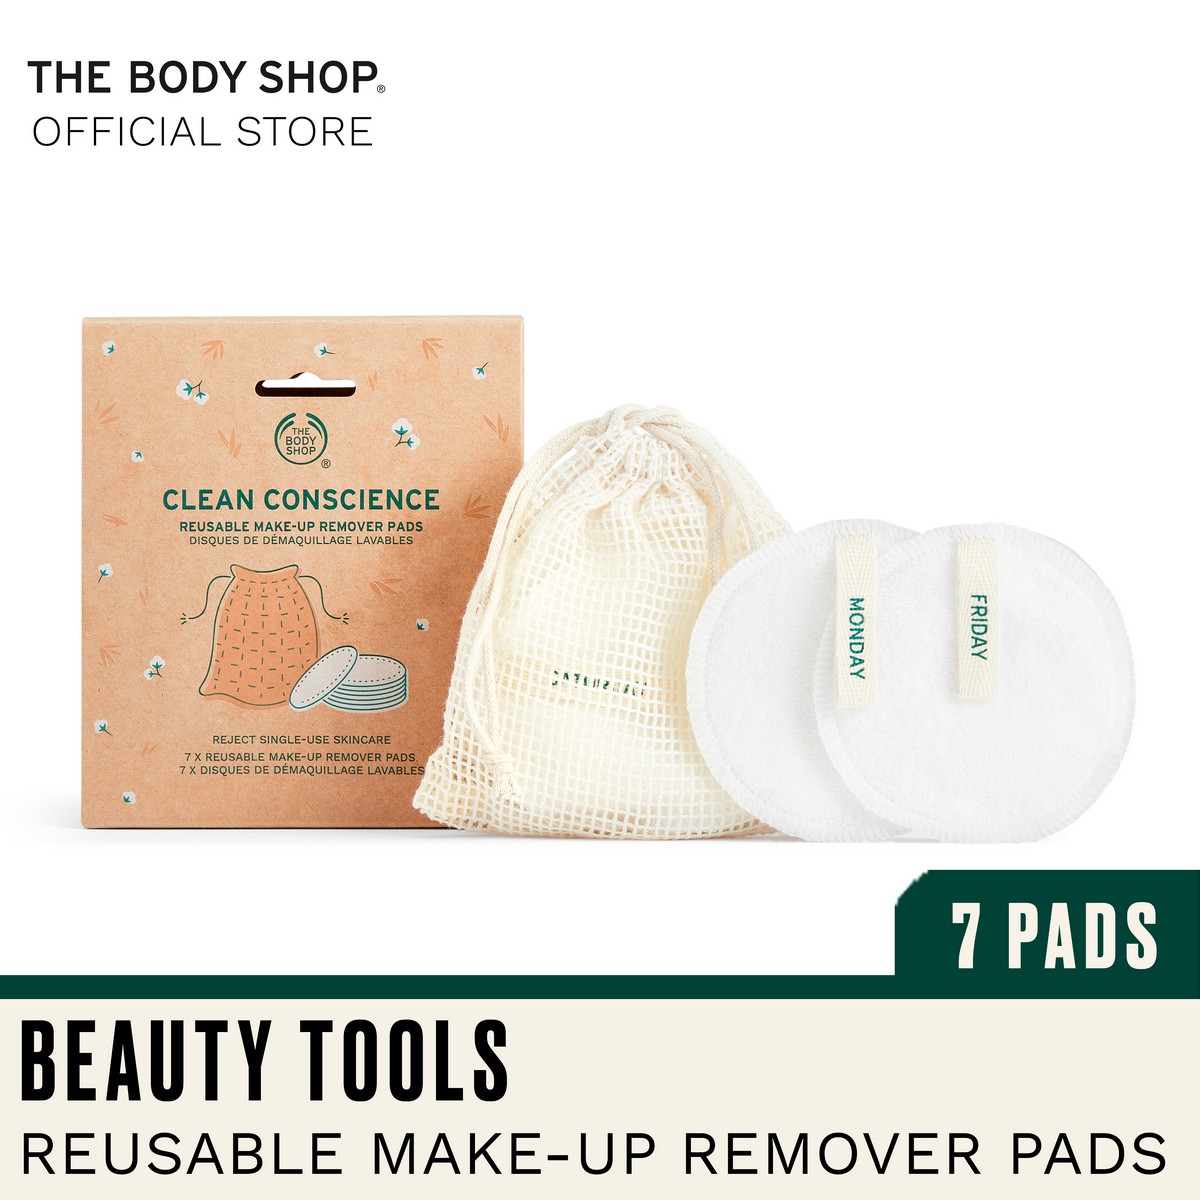 Clean Conscience Reusable Make-Up Remover Pads | Skincare & Makeup offers